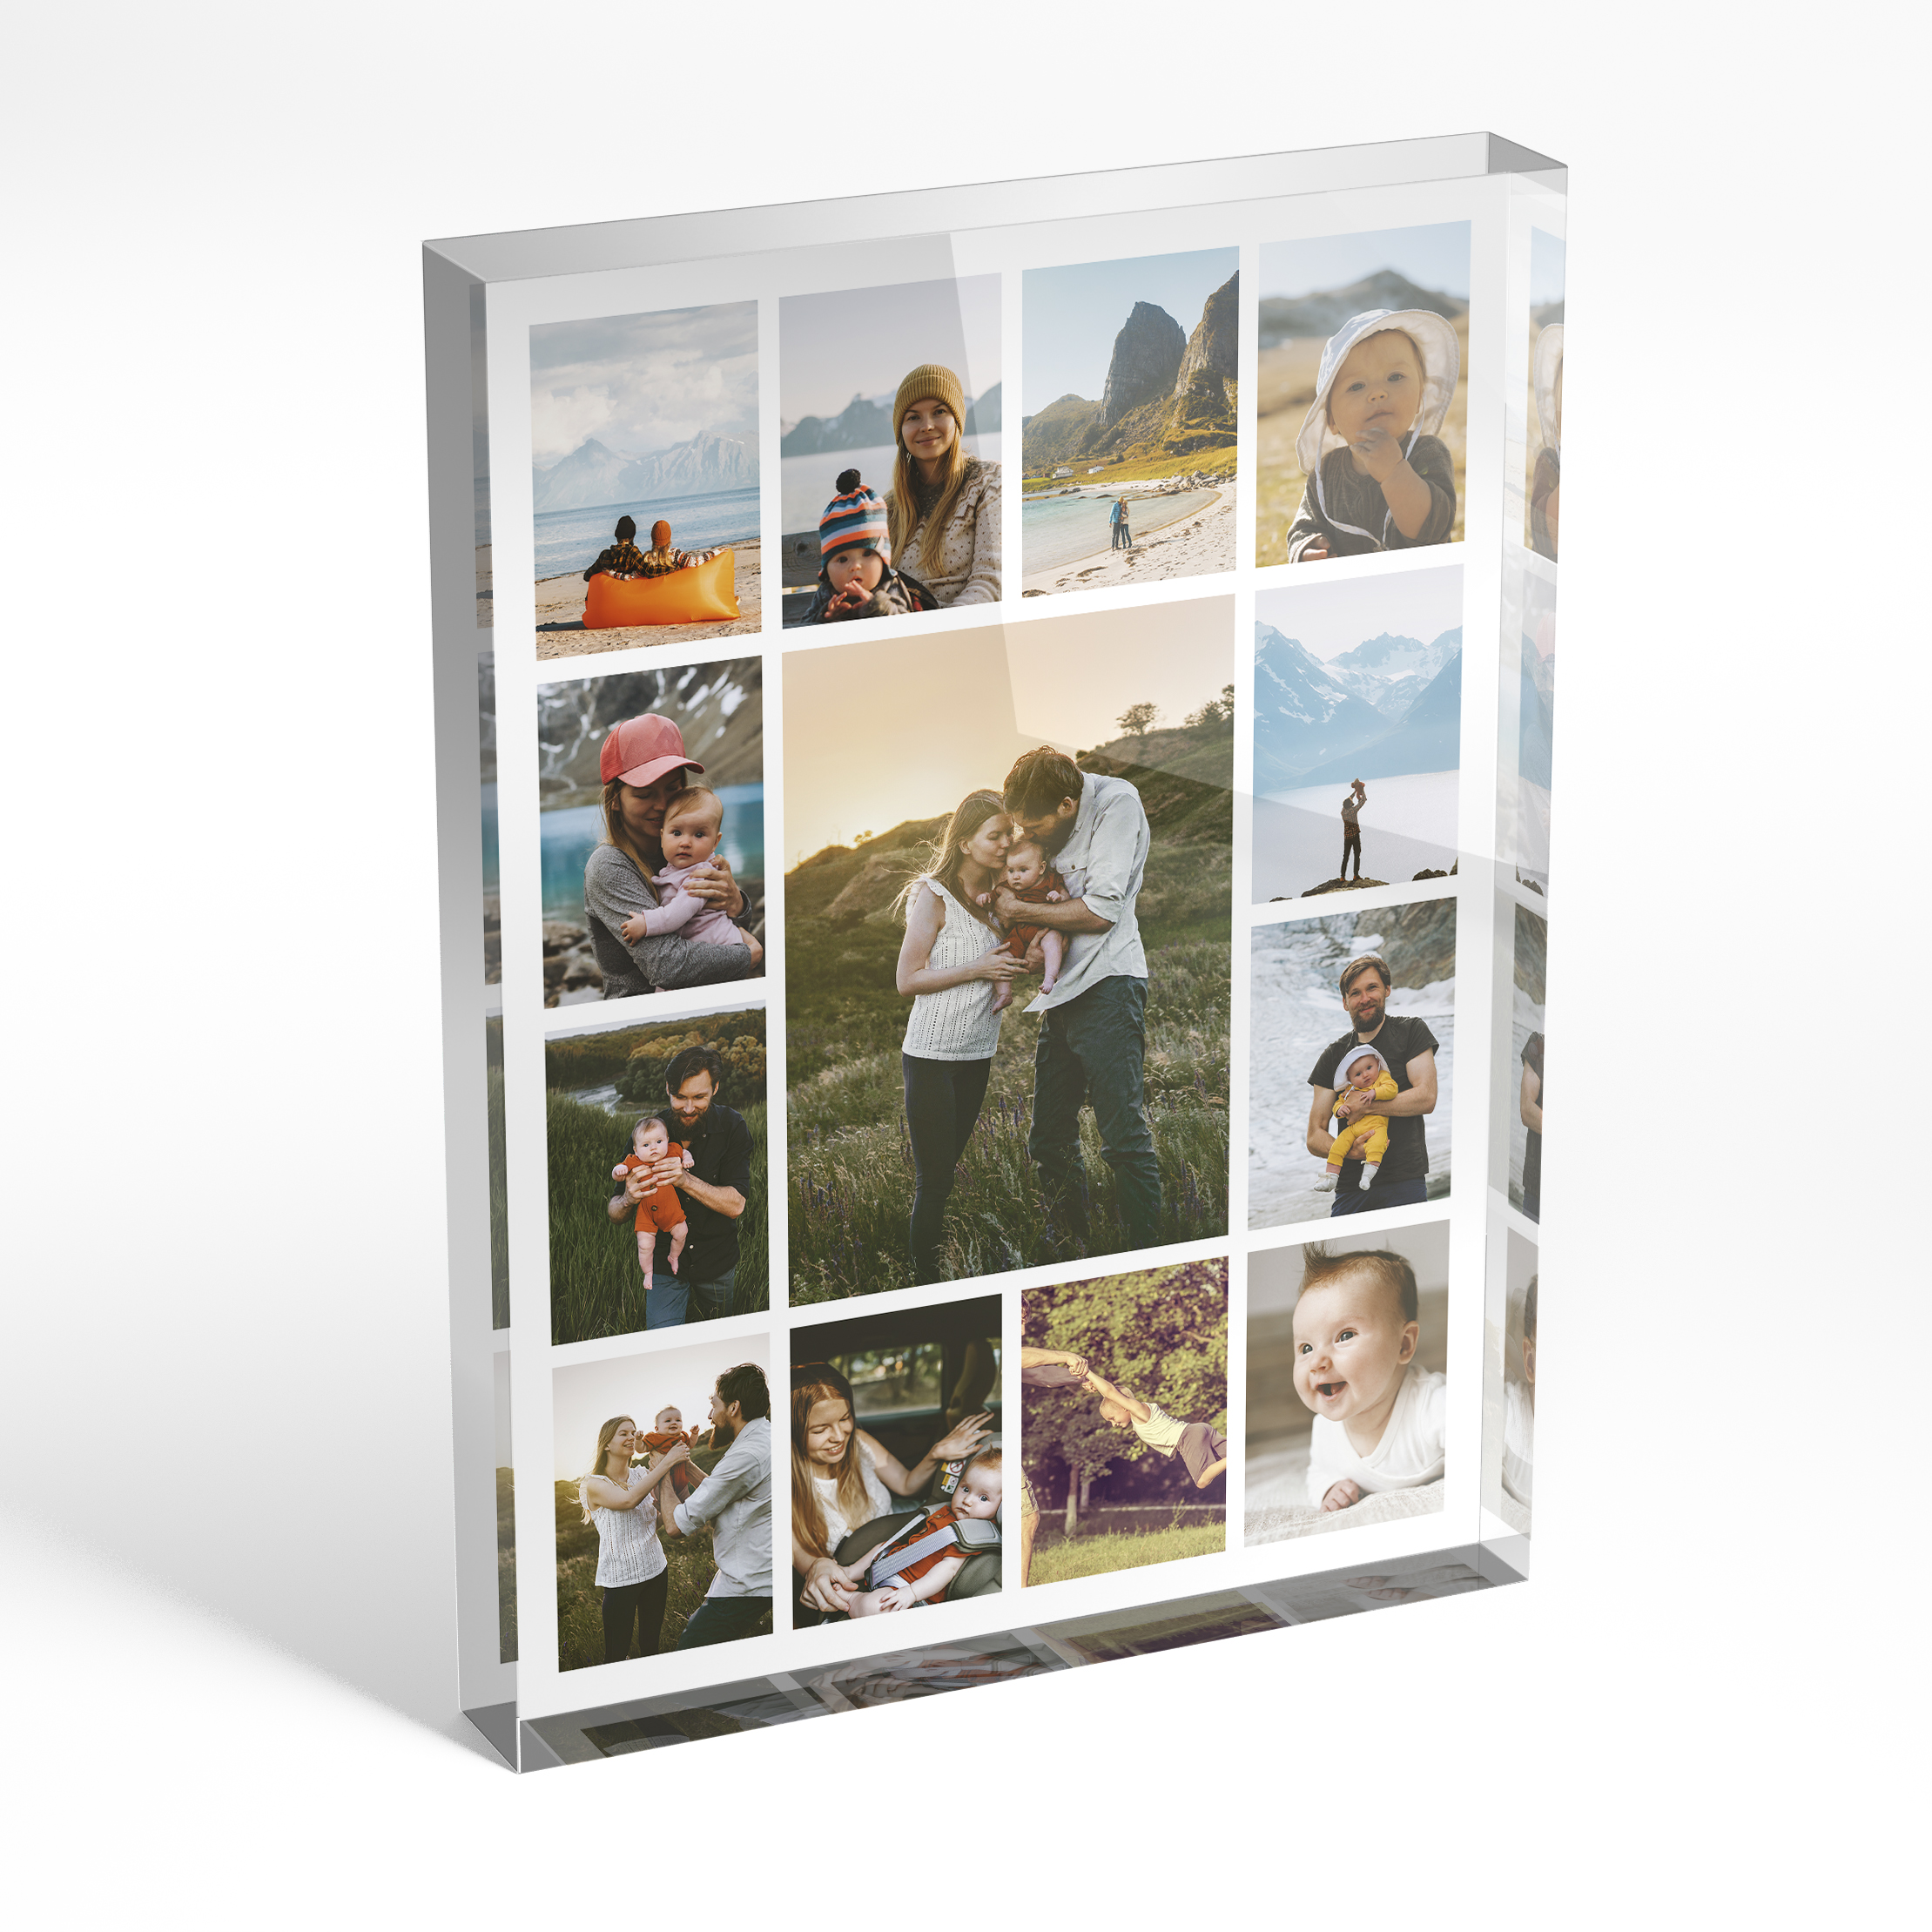 An angled side view of a portrait layout Online acrylic photo blocks with space for 10+ photos. Thiis design is named "Melody of Memories". 